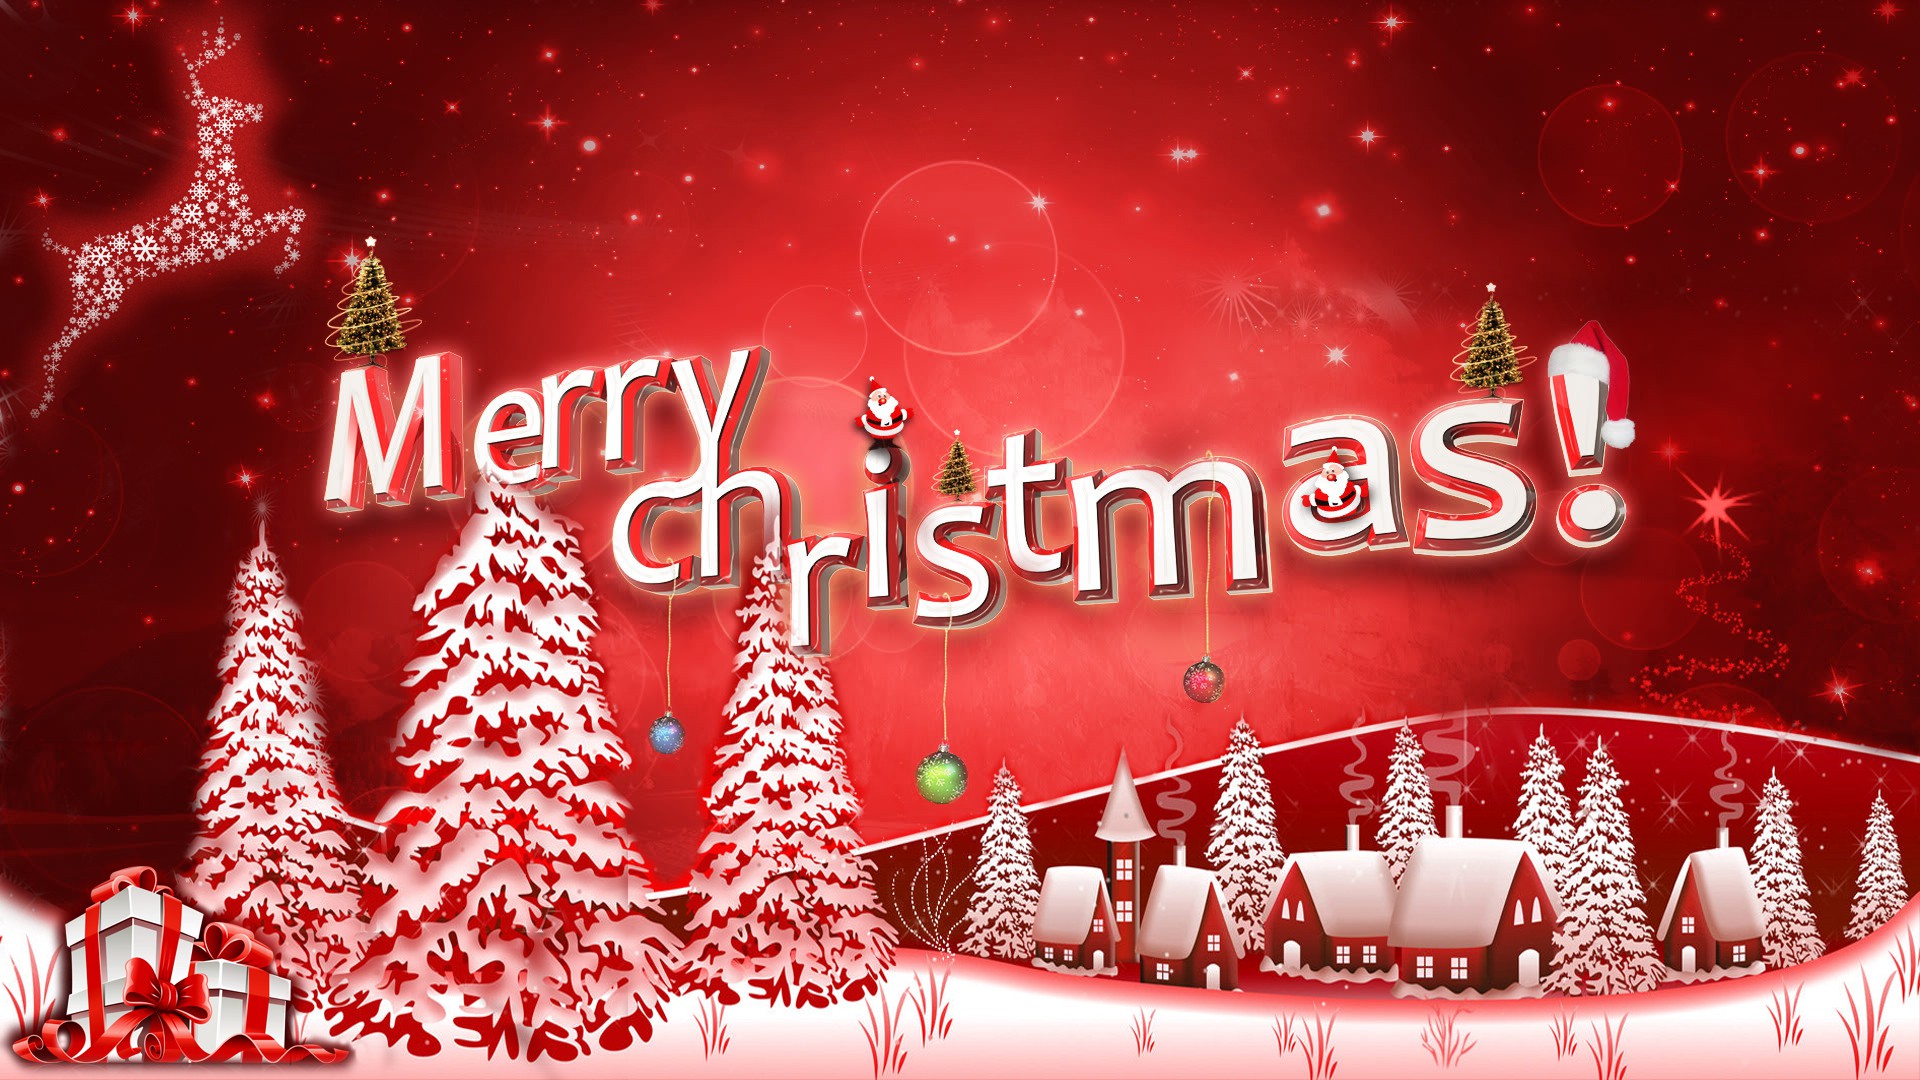 Free download Free Hd Animated Merry Christmas Wallpapers Download  [1920x1080] for your Desktop, Mobile & Tablet | Explore 59+ Free Wallpapers  Christmas | Free Christmas Backgrounds, Free Christmas Wallpaper, Free  Wallpaper Christmas